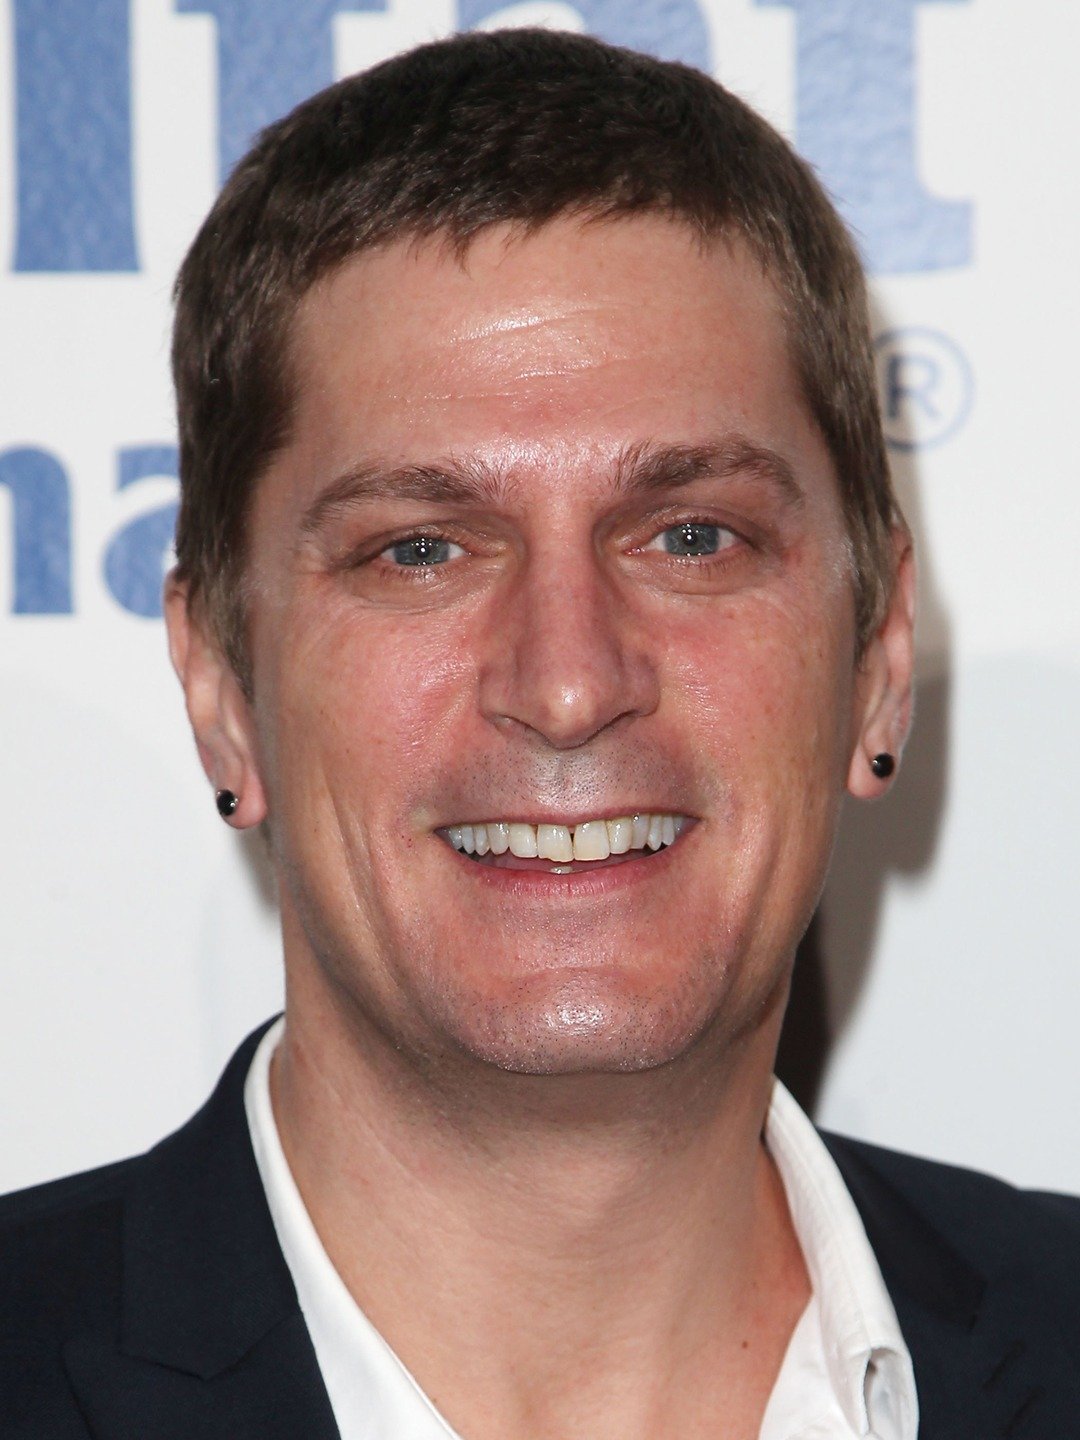 How tall is Rob Thomas?